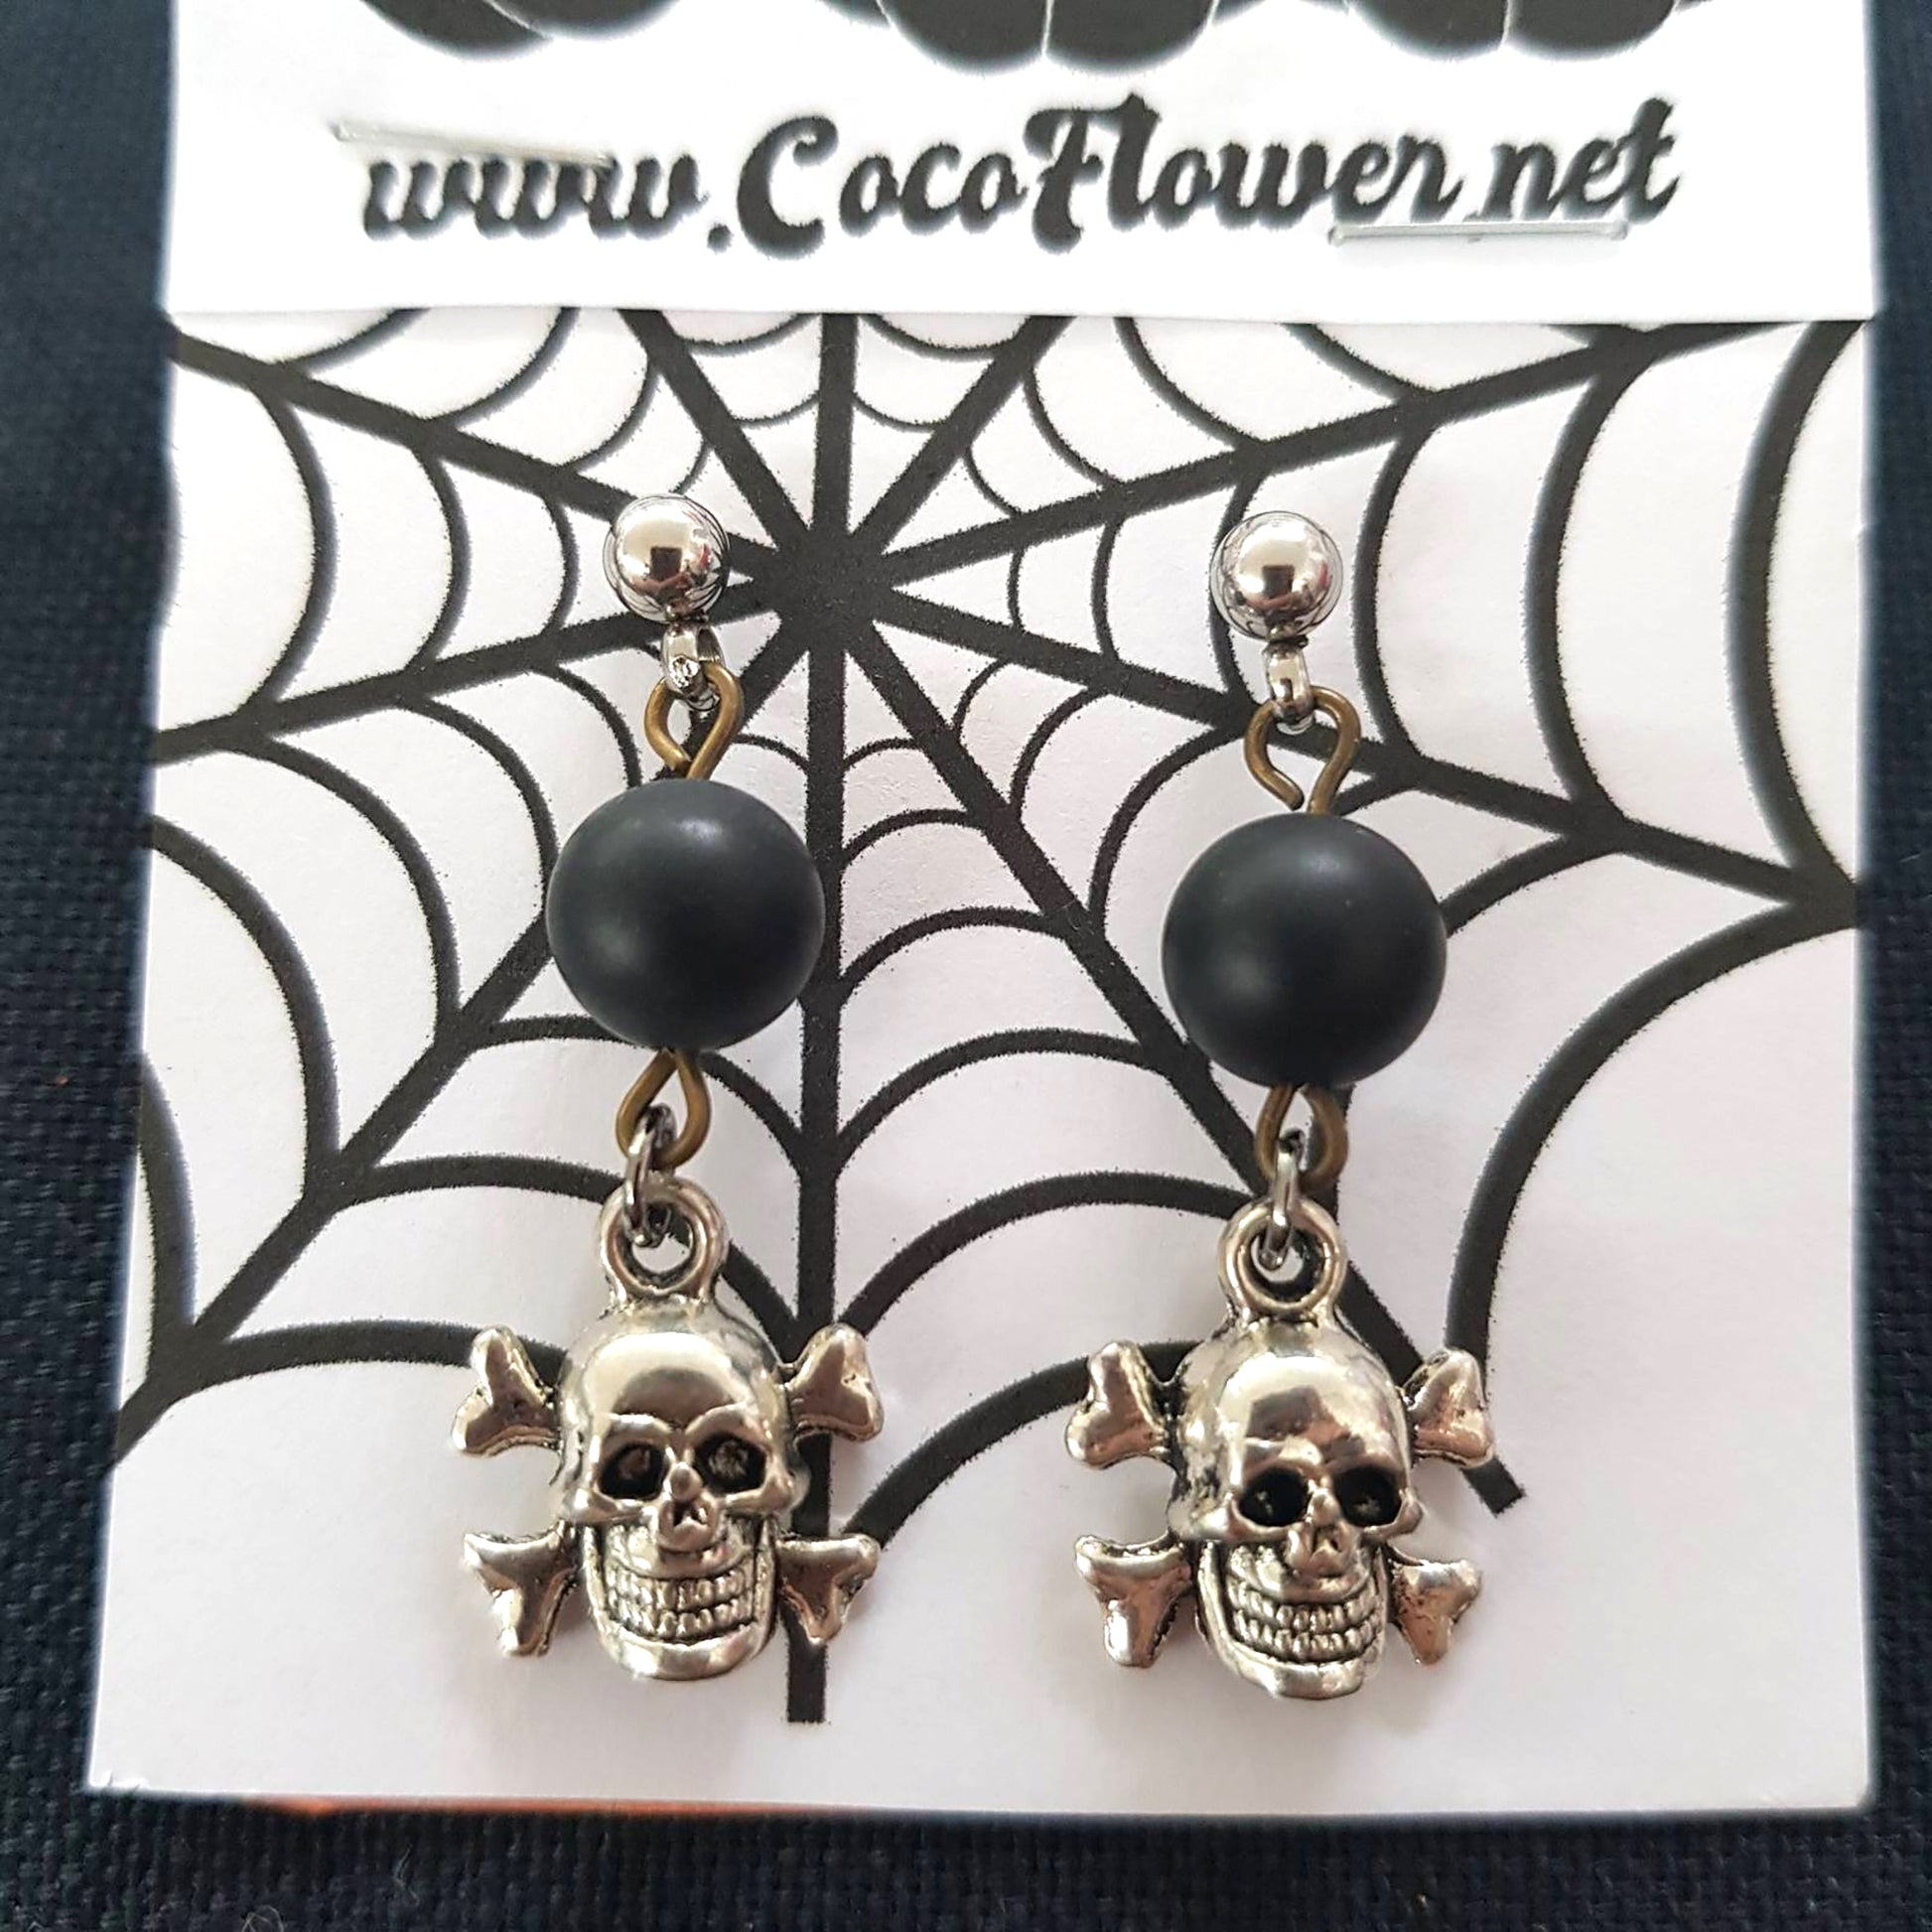 "Unleash Your Edge: Rebel Skull and Onyx Earrings Command Attention"